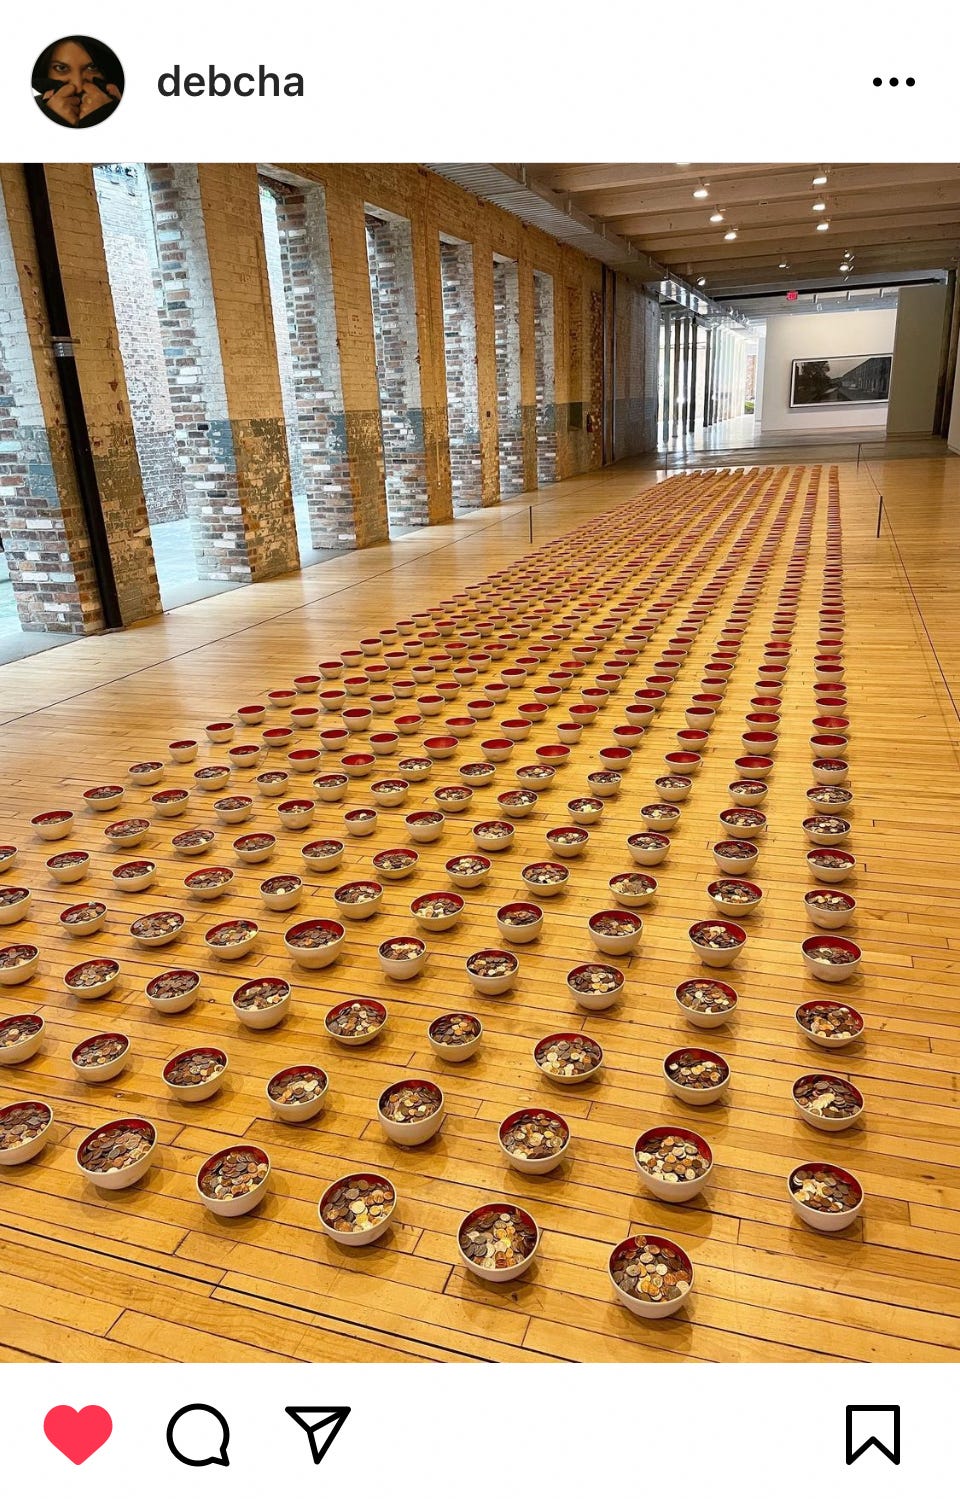 A grid of brass bowls lined up on a wooden floor, some filled with change.